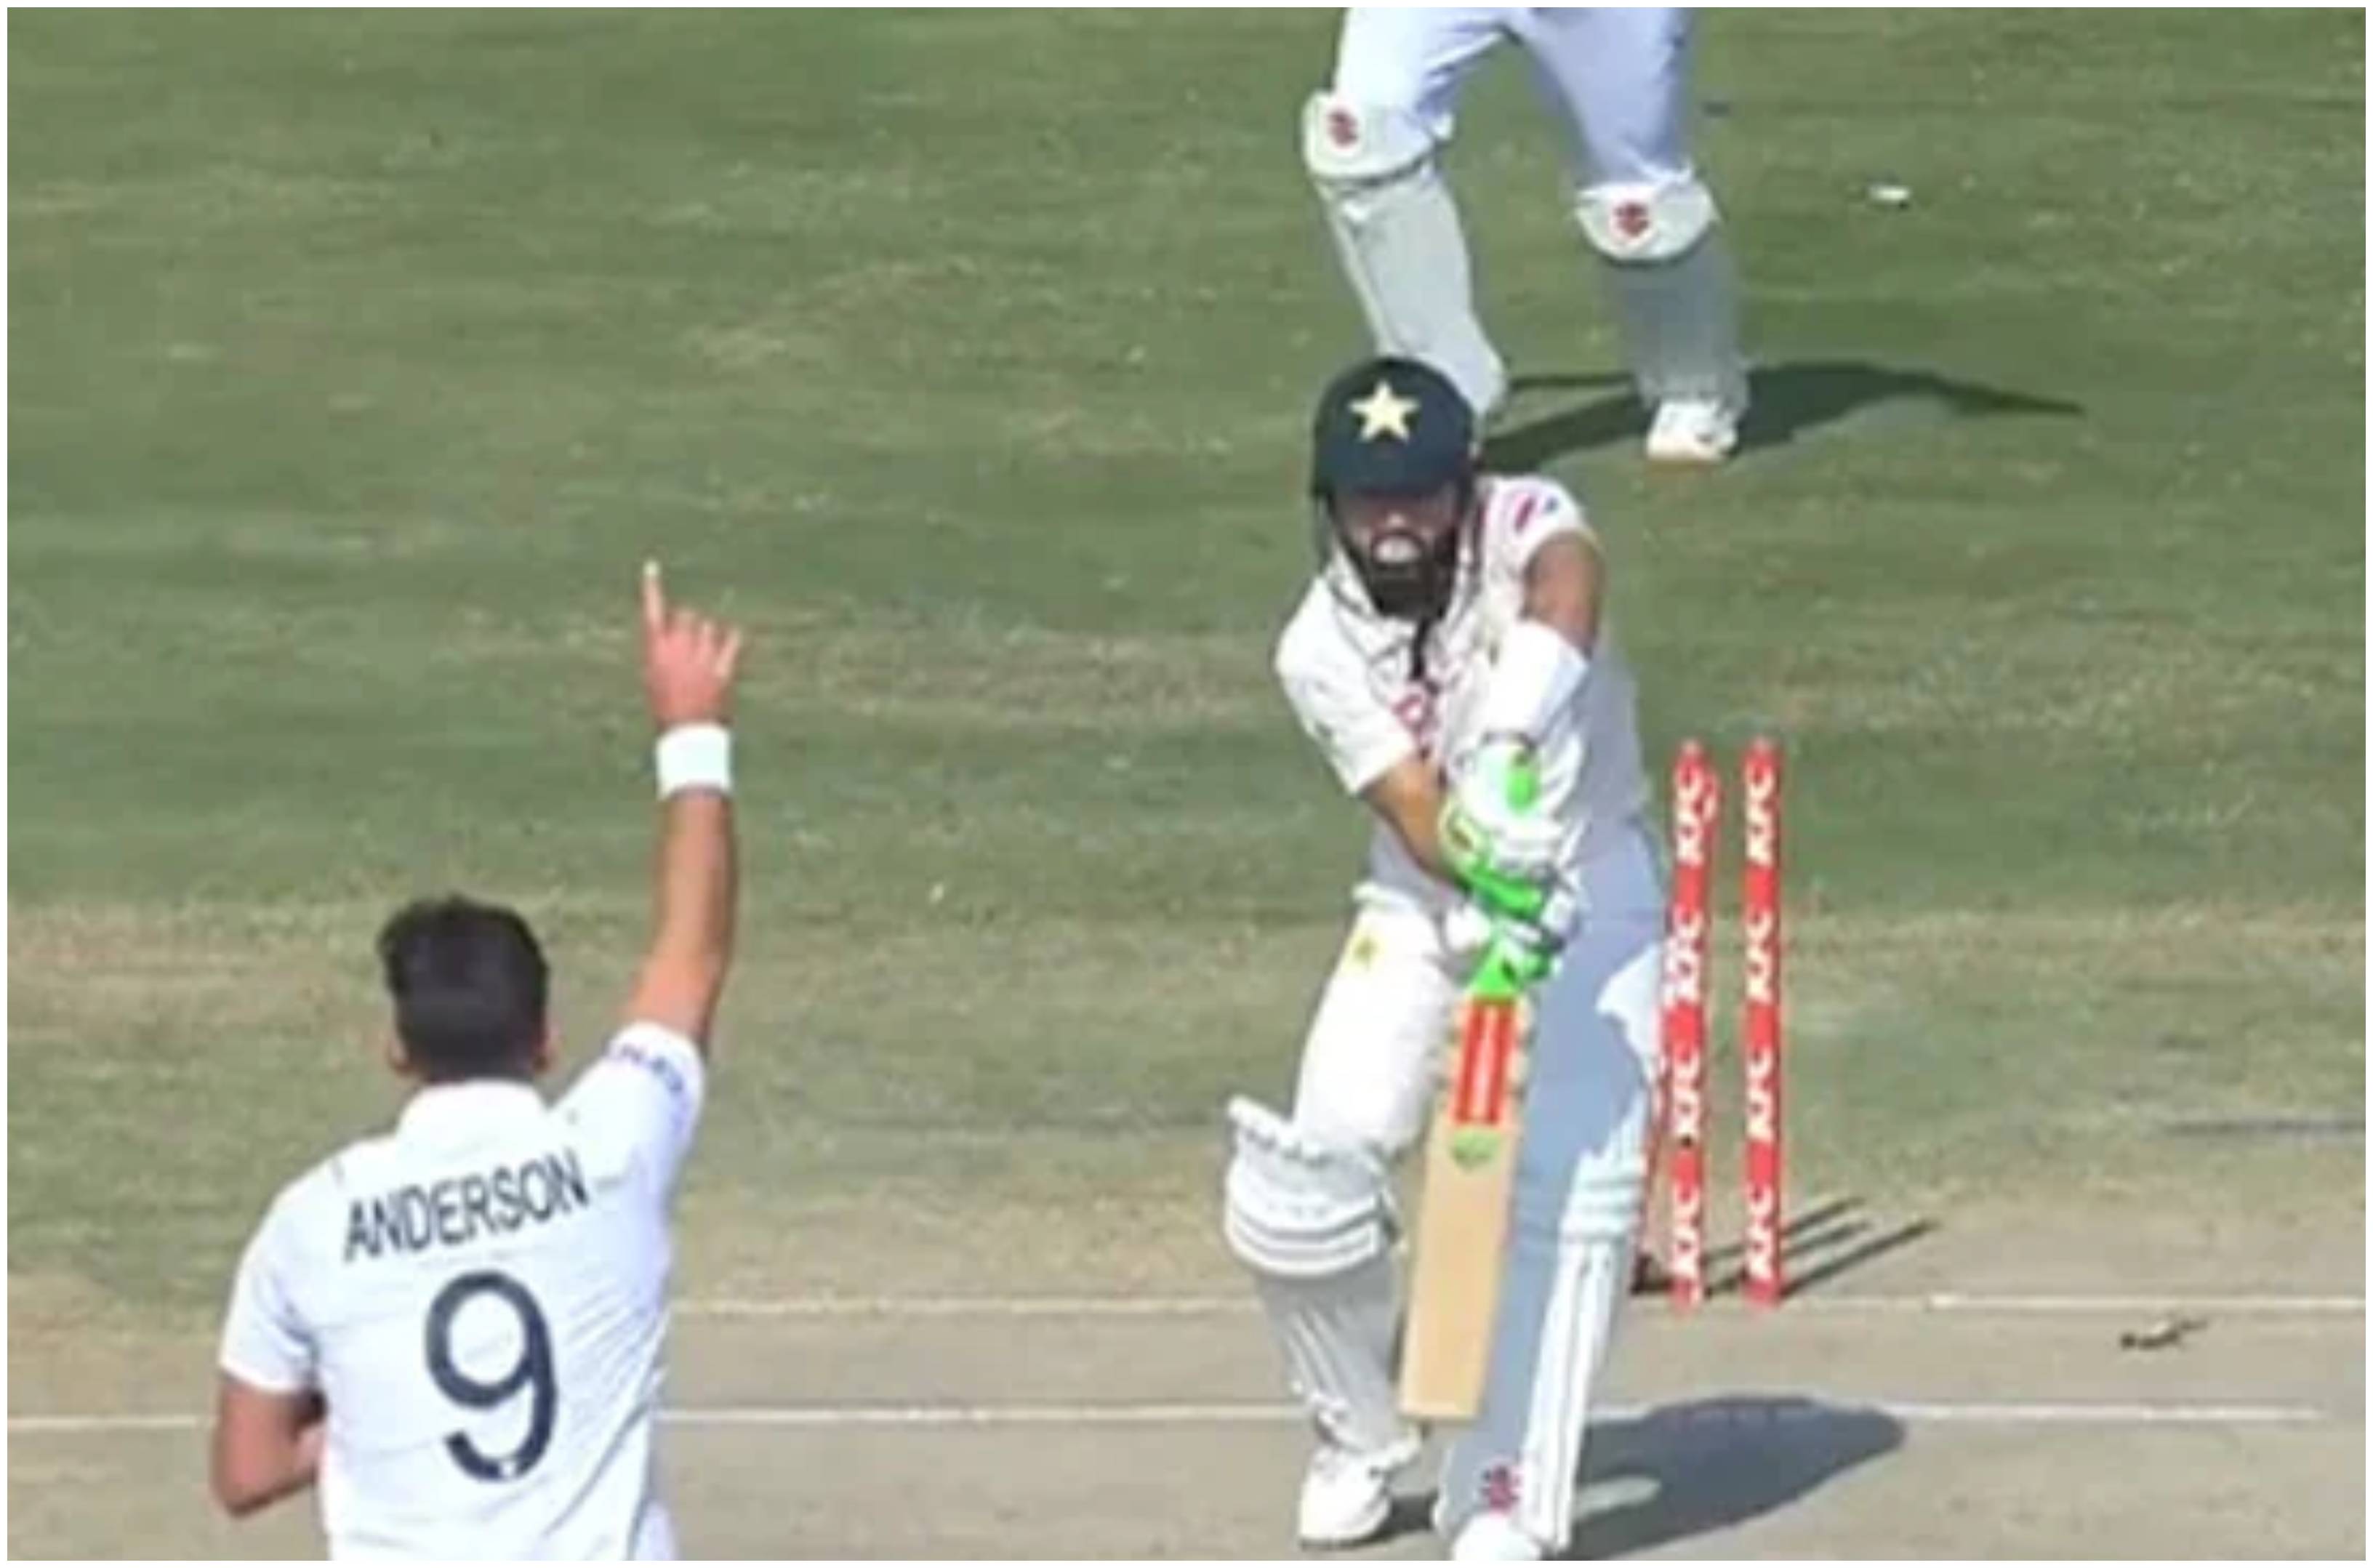 Anderson castled Rizwan with a beauty | Screengrab